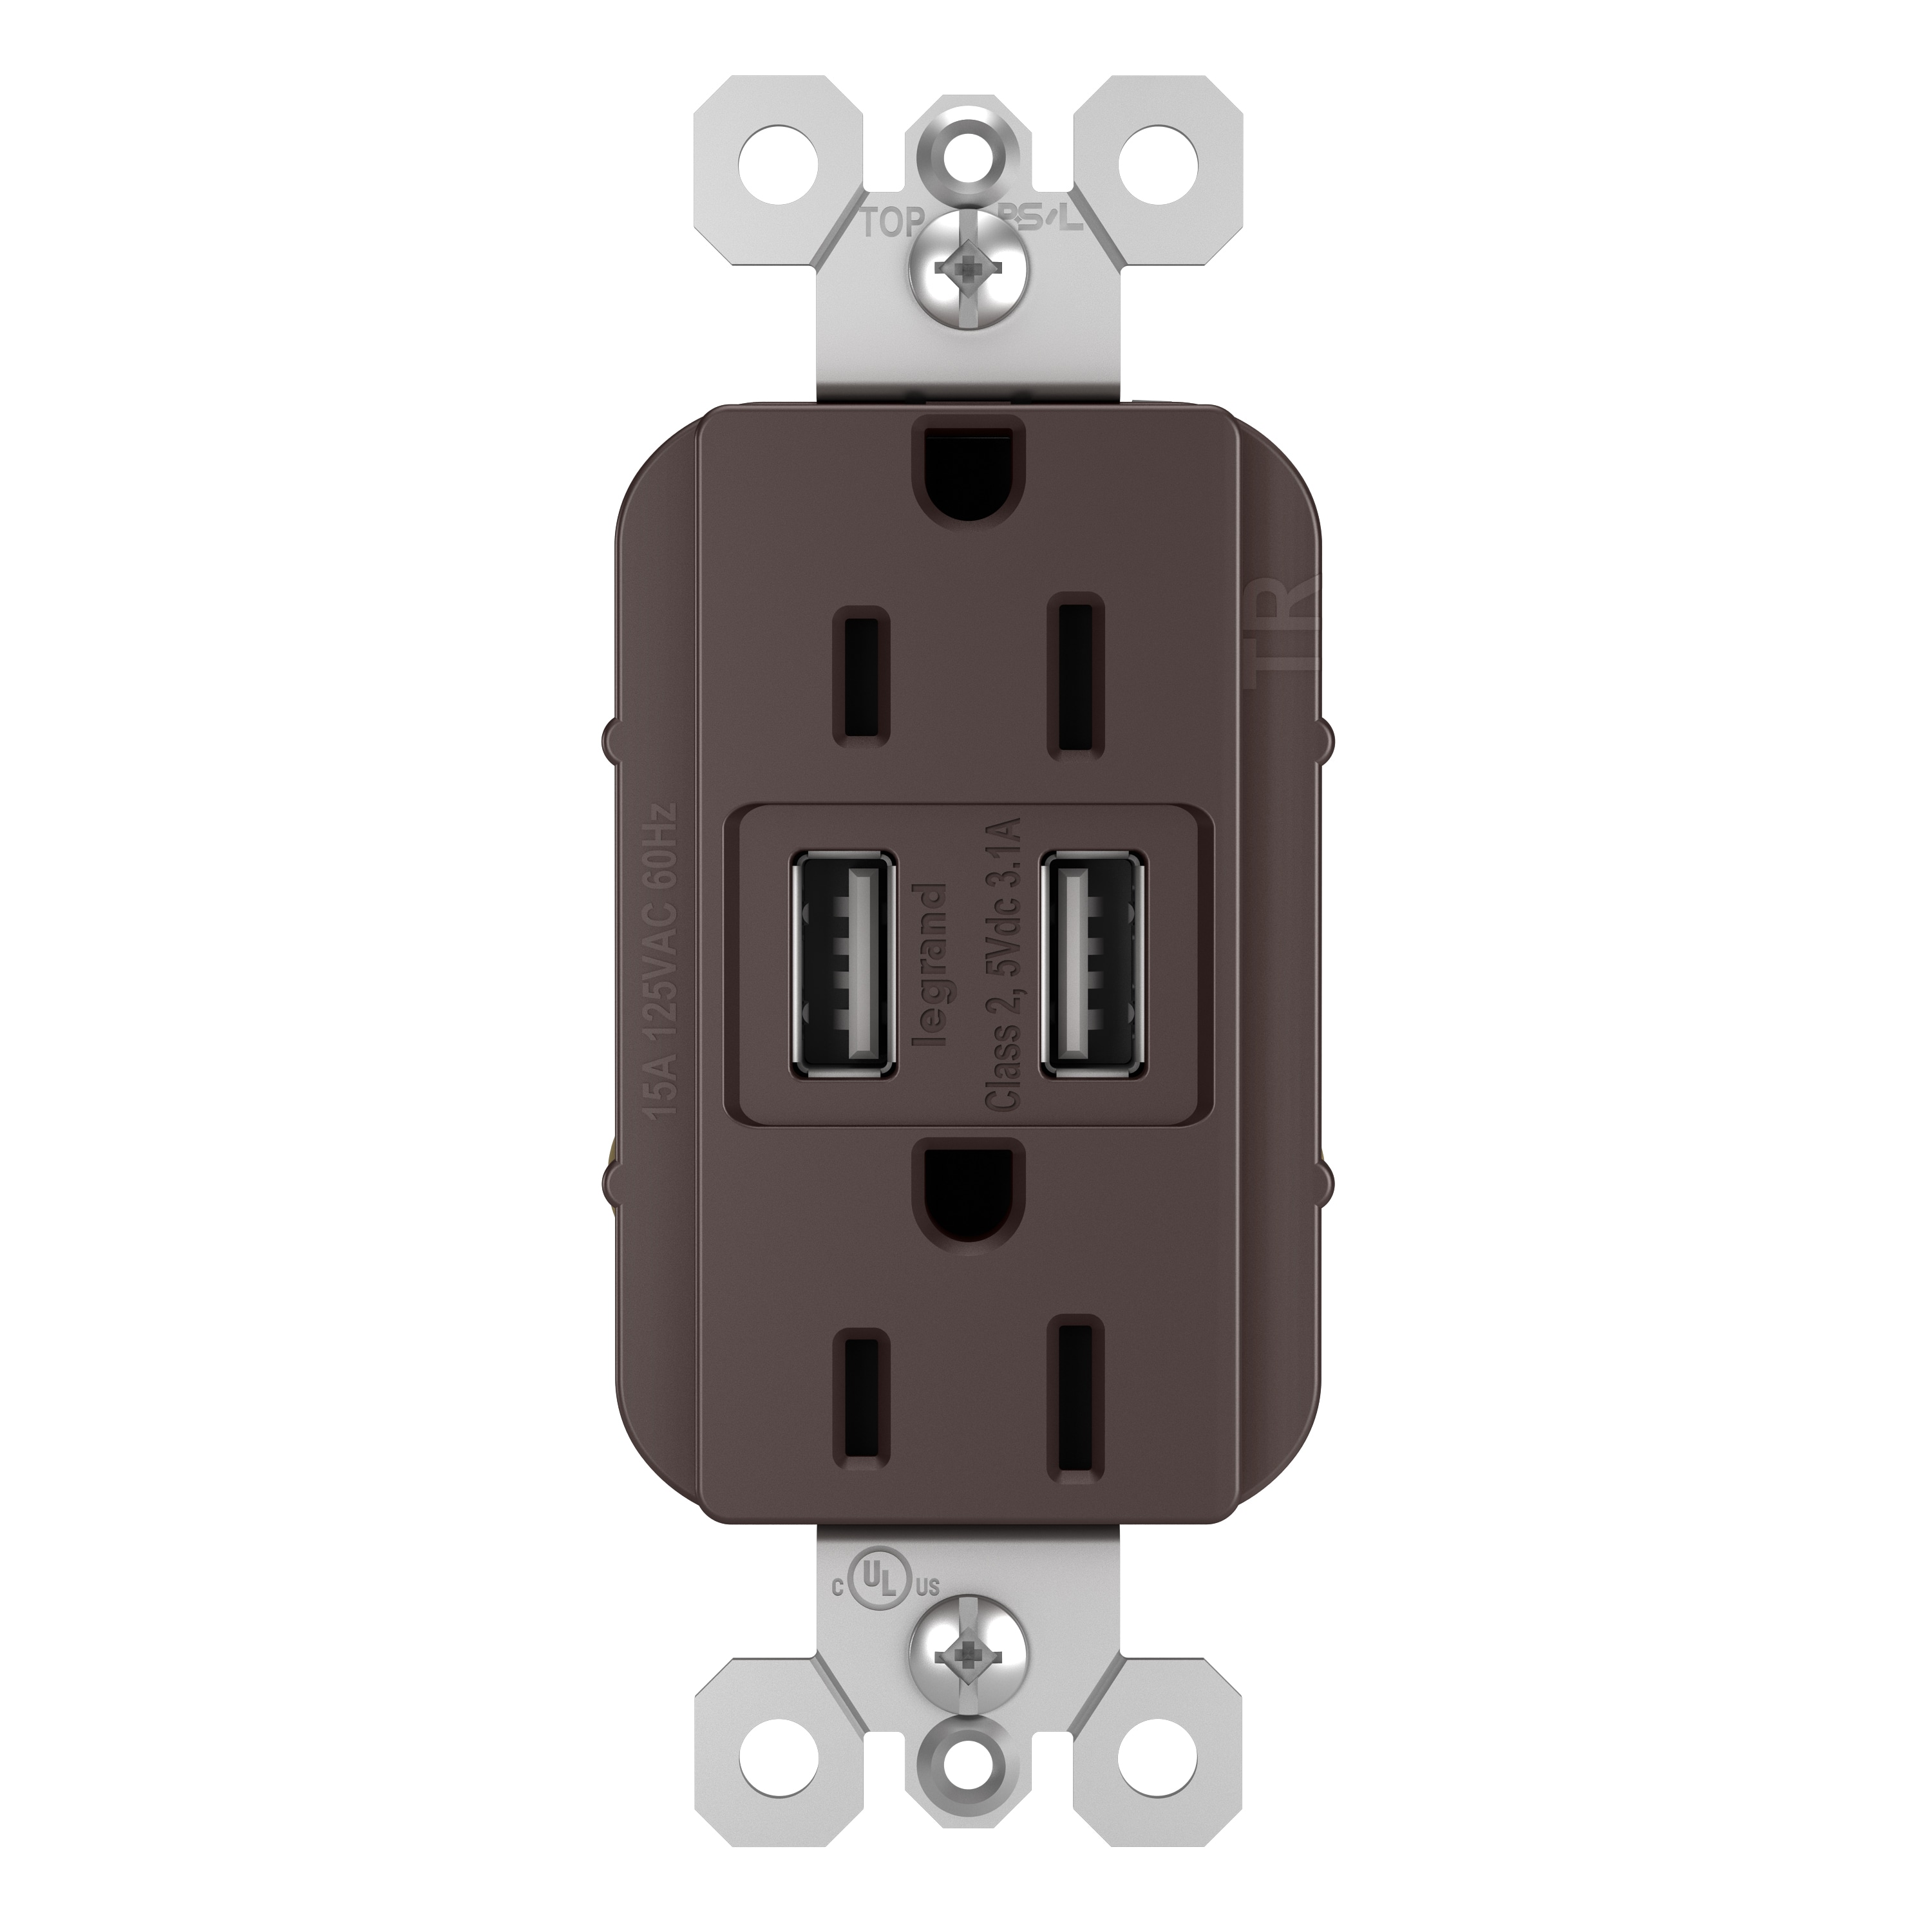 Legrand USB Receptacle Kit Electrical Wall Outlet